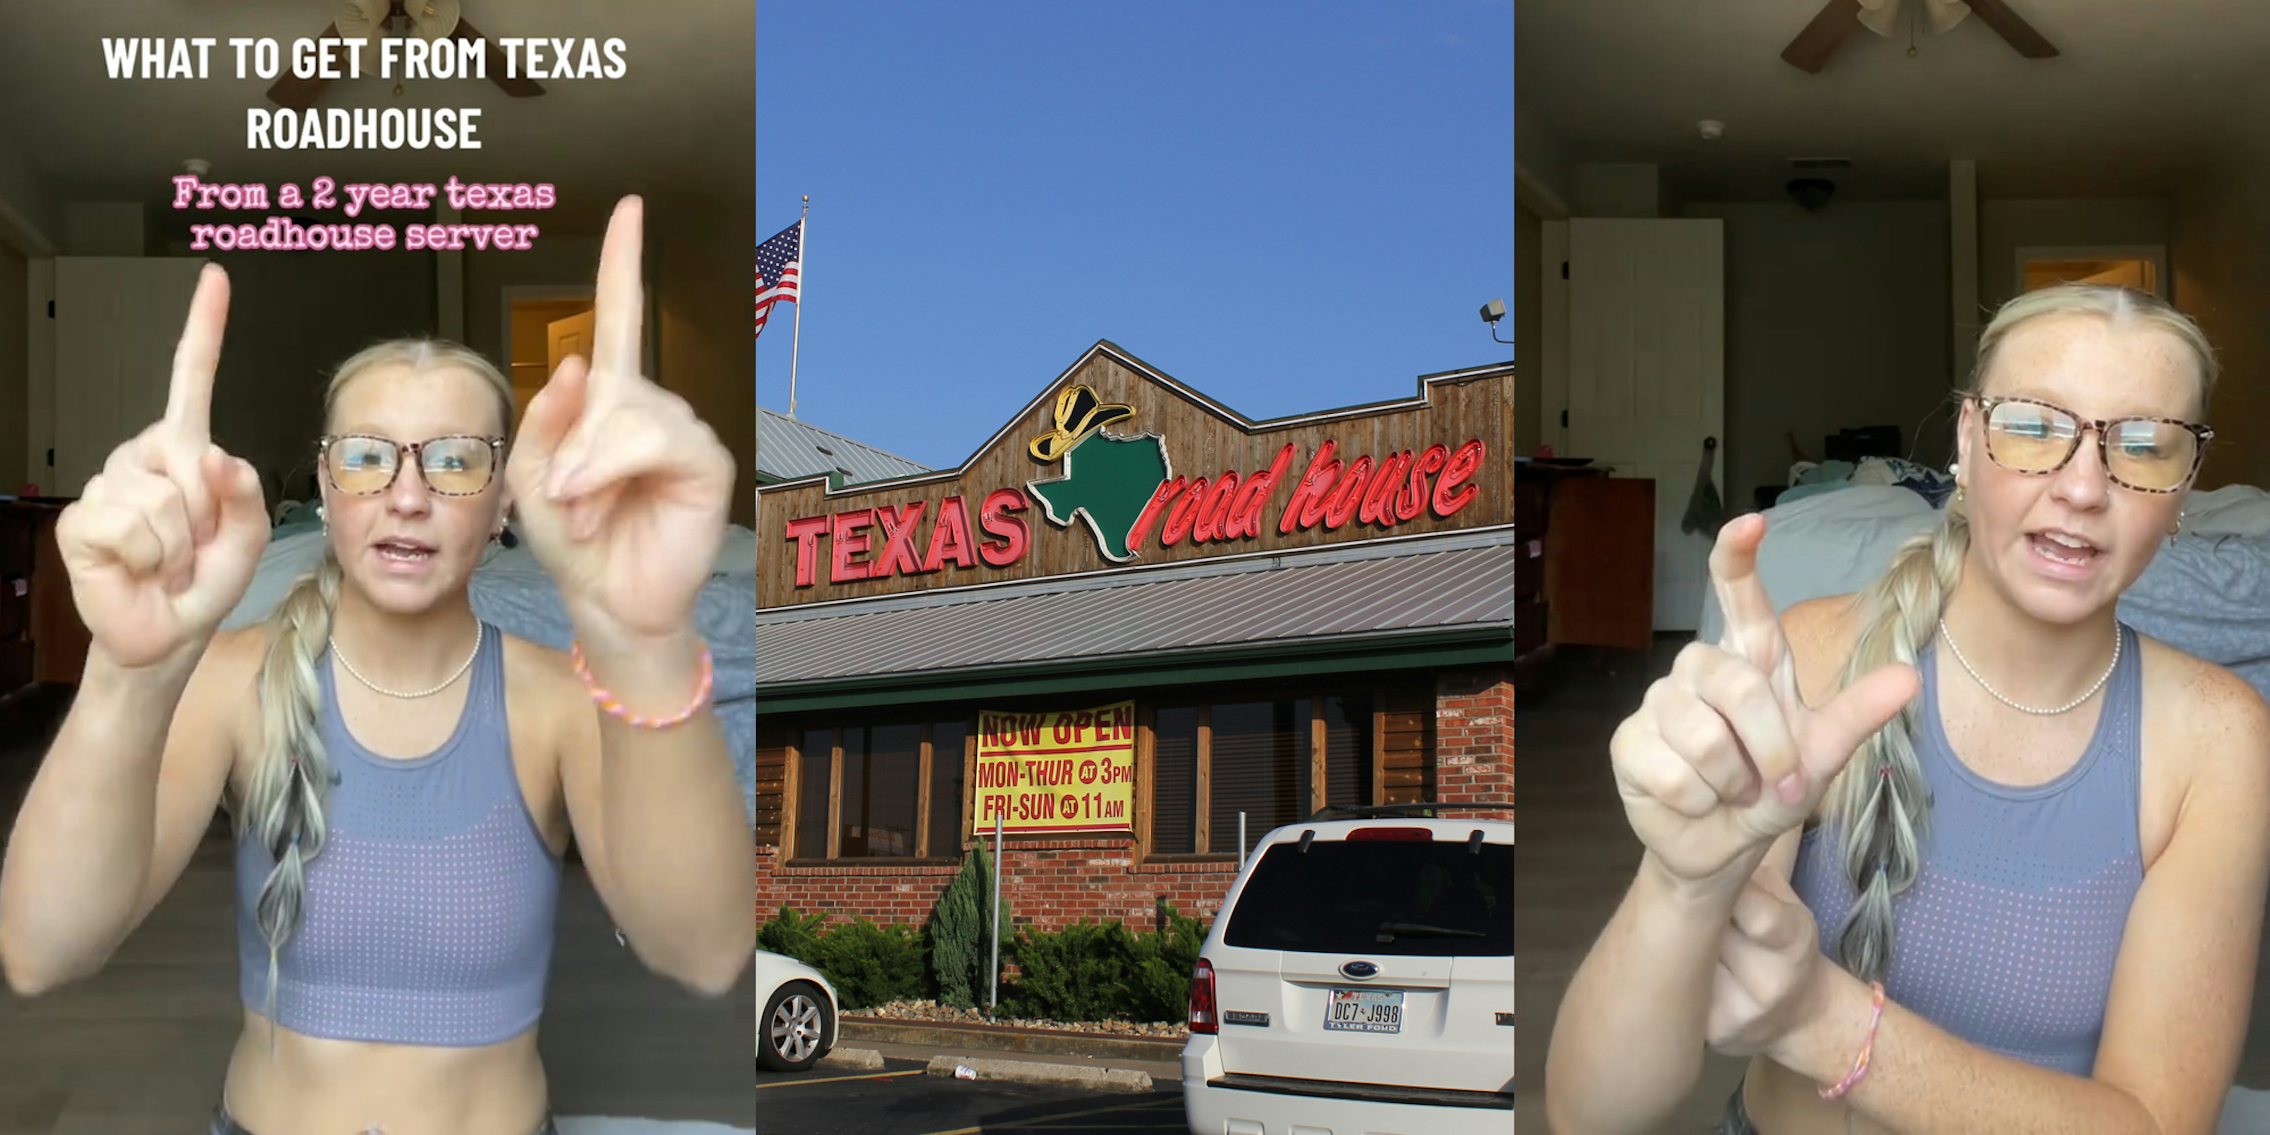 Texas Roadhouse server speaking with caption 'WHAT TO GET FROM TEXAS ROADHOUSE From a 2 year texas roadhouse server' (l) Texas Roadhouse building with sign (c) Texas Roadhouse server speaking (r)